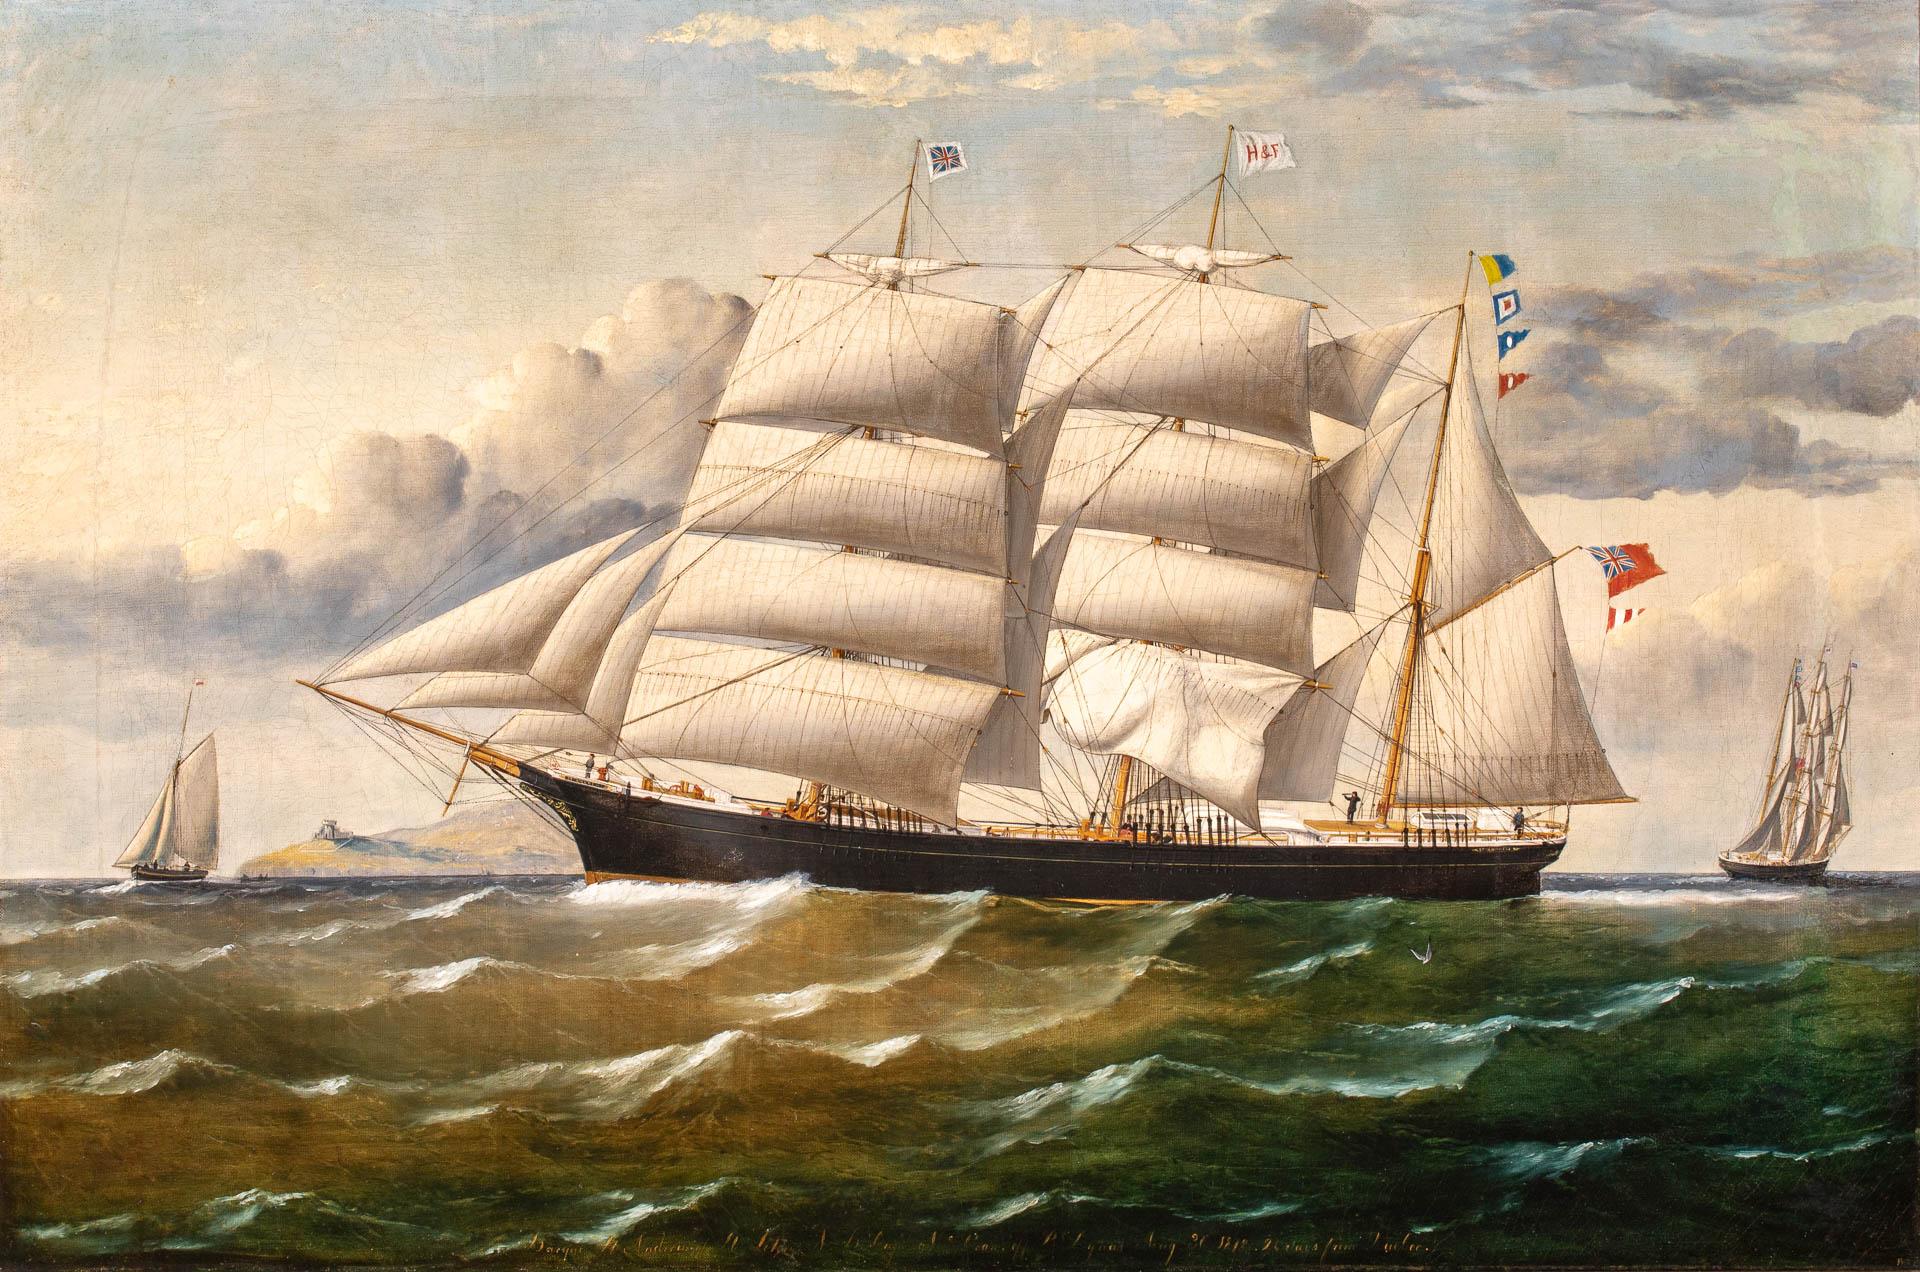 Bark ST. ANDREW off Point Lynas, Liverpool - Painting by William G. Yorke